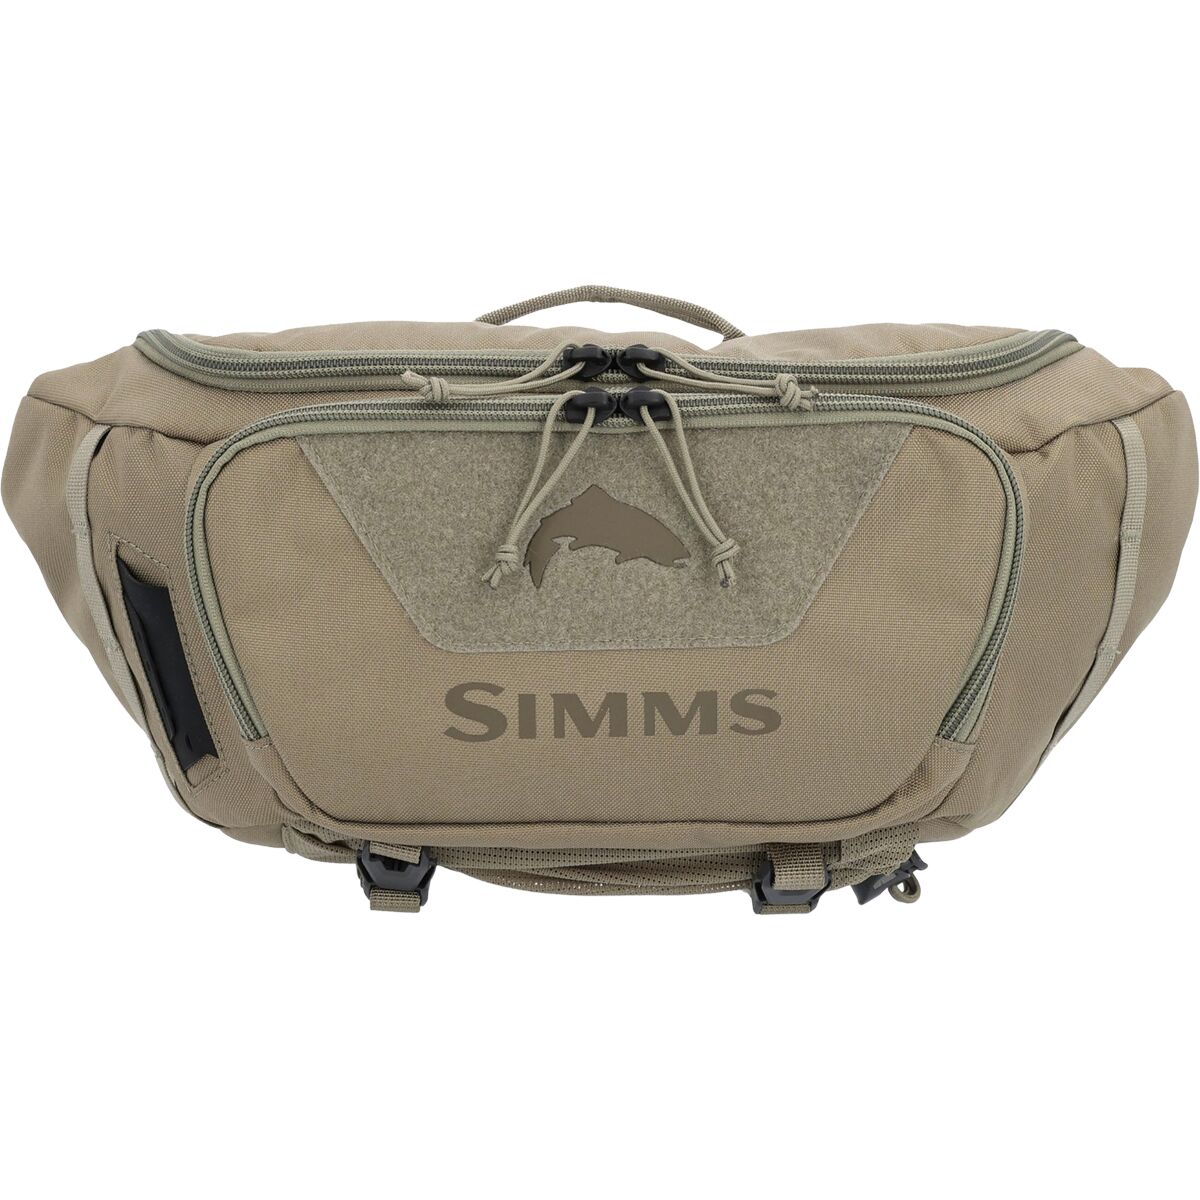 Simms Tributary Hip Pack - Fly Fishing | Backcountry